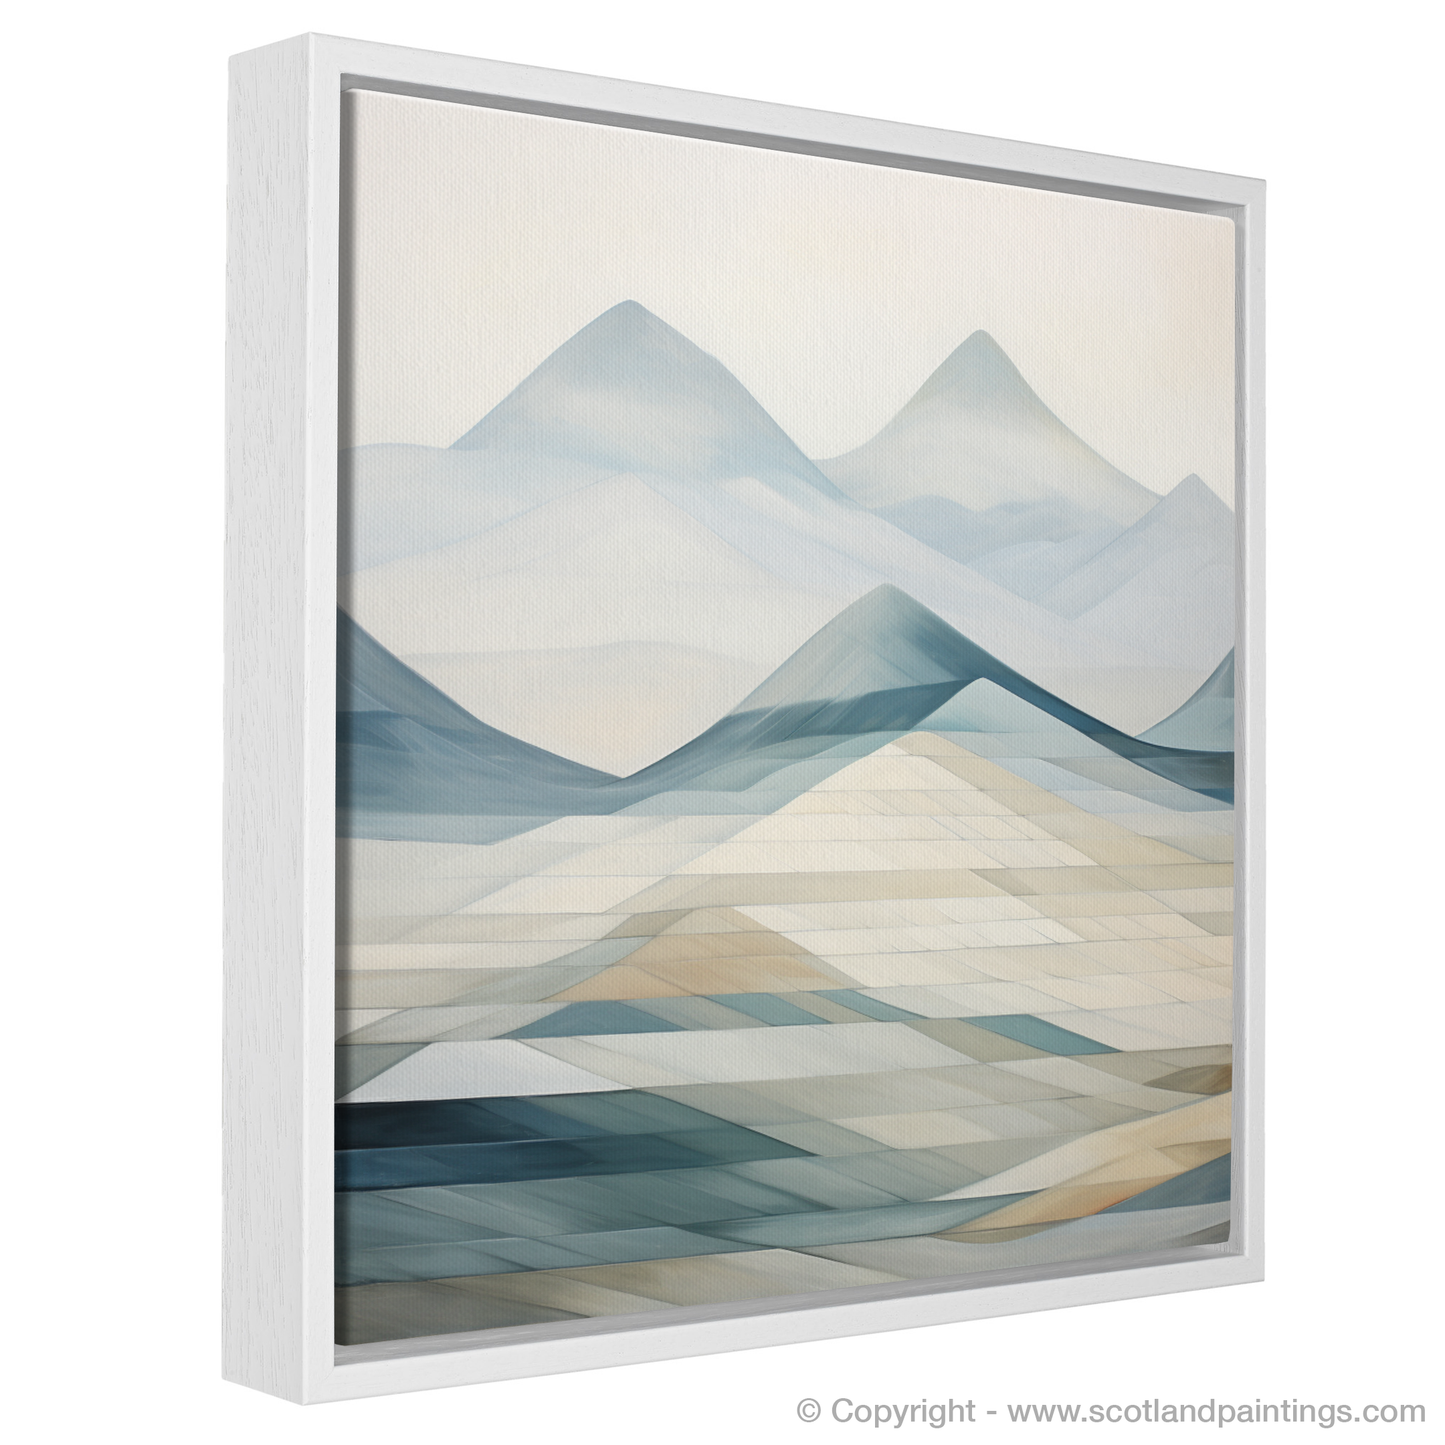 Painting and Art Print of Cruach Àrdrain entitled "Ethereal Dance of the Scottish Munros".